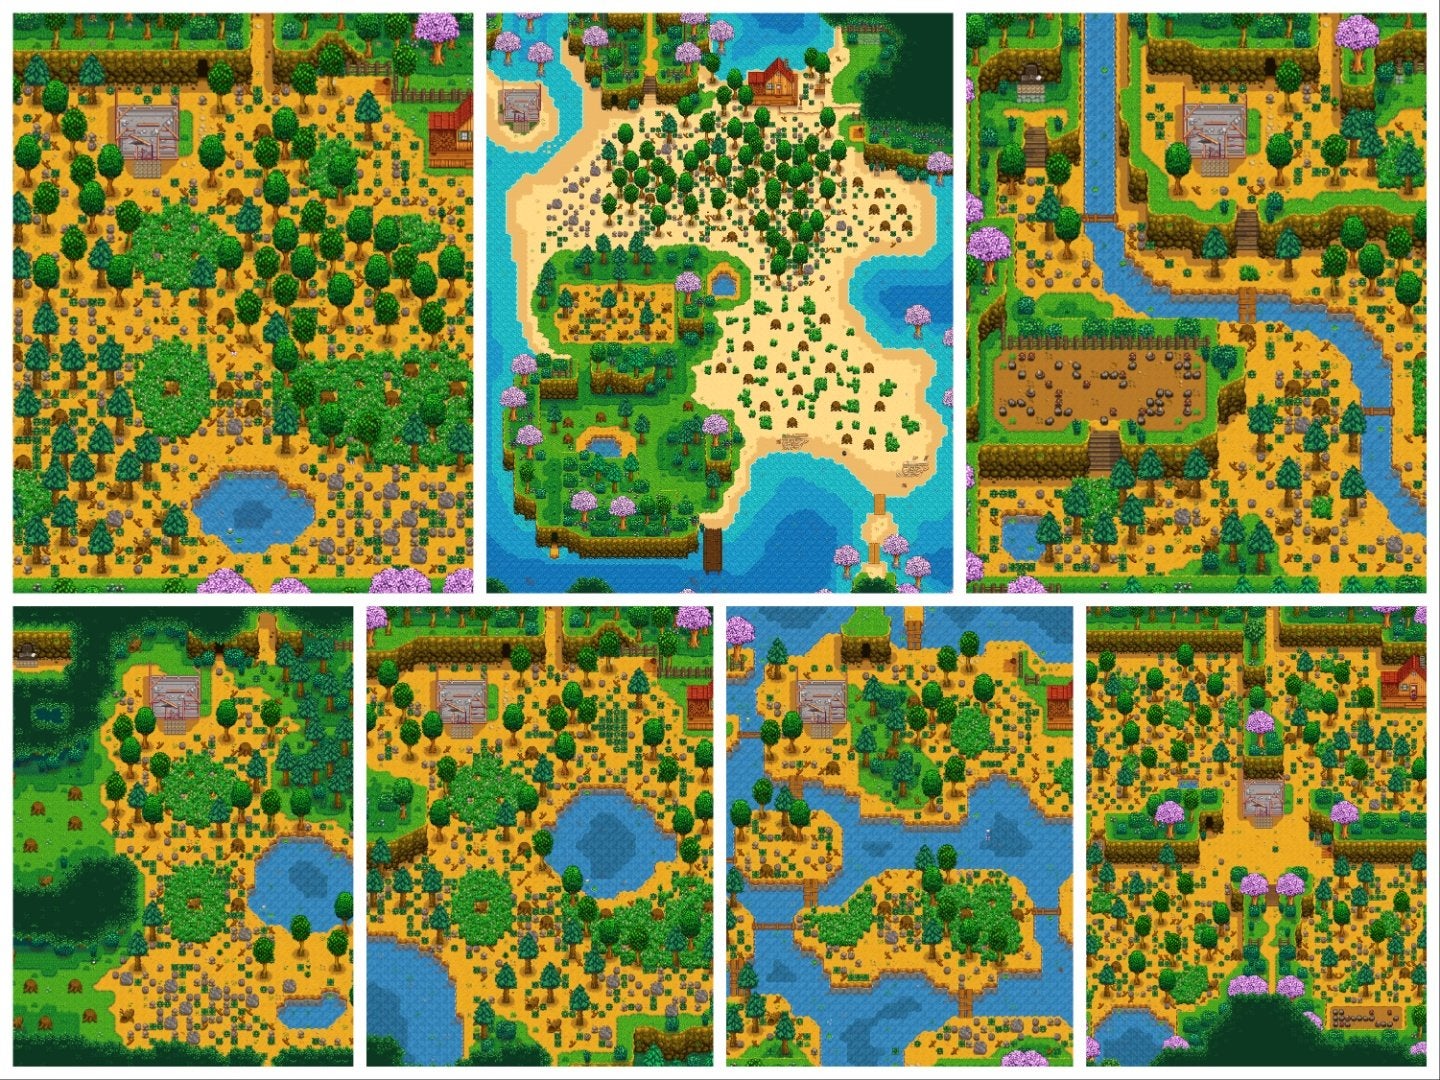 All seven Stardew Valley starting farm layouts: Standard, Beach, Hill-Top, Forest, Wilderness, Riverlands, and Four Corners. 